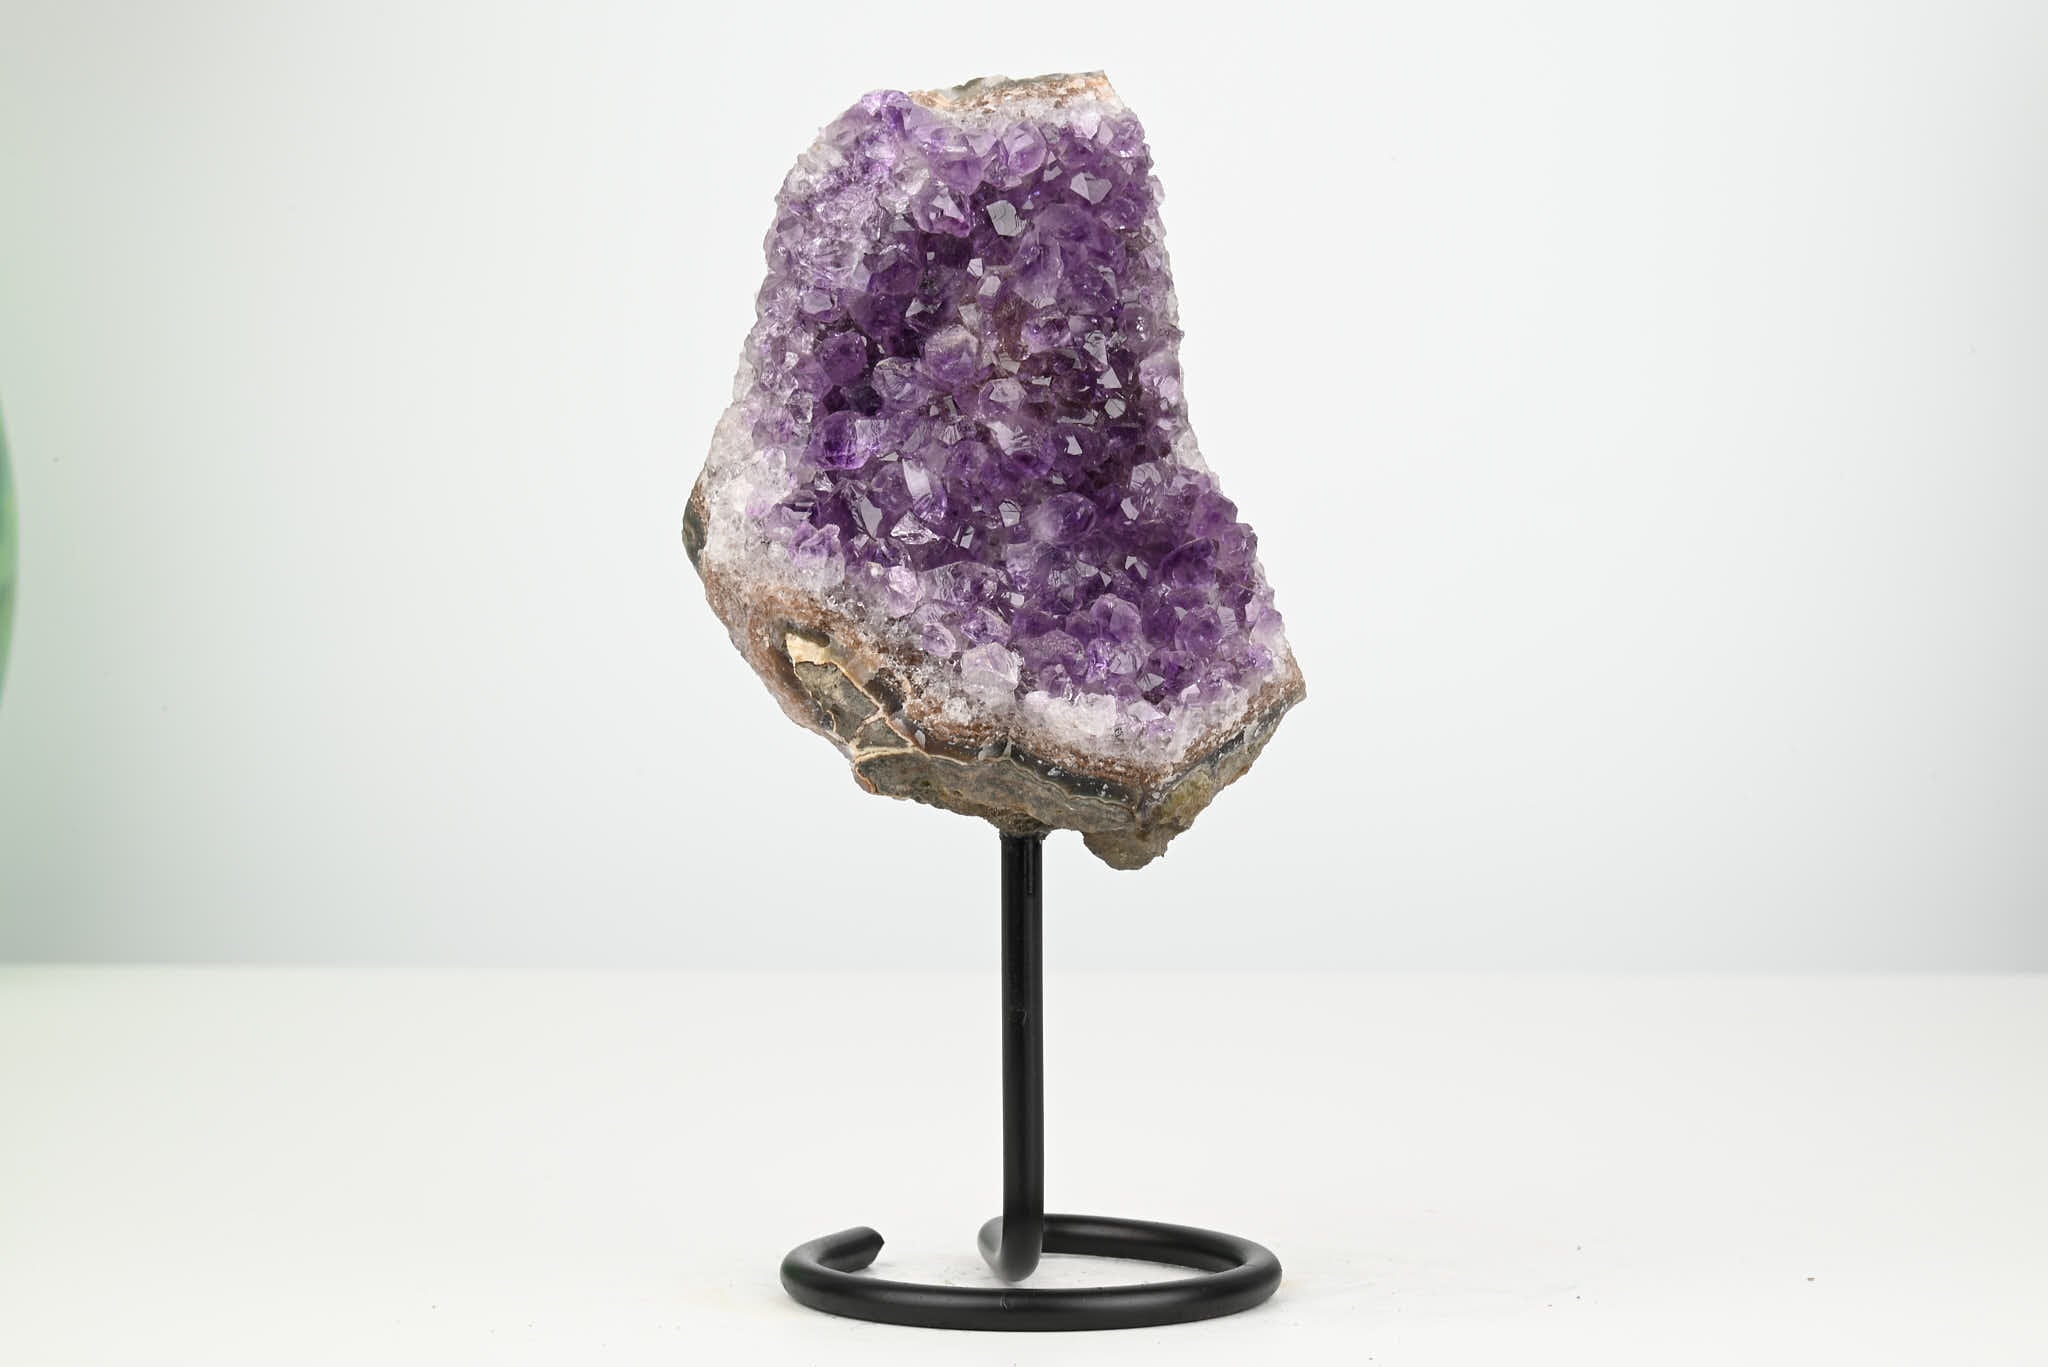 Amethyst Cluster on Stand - Small 16cm Tall - #CLUSAM-63043